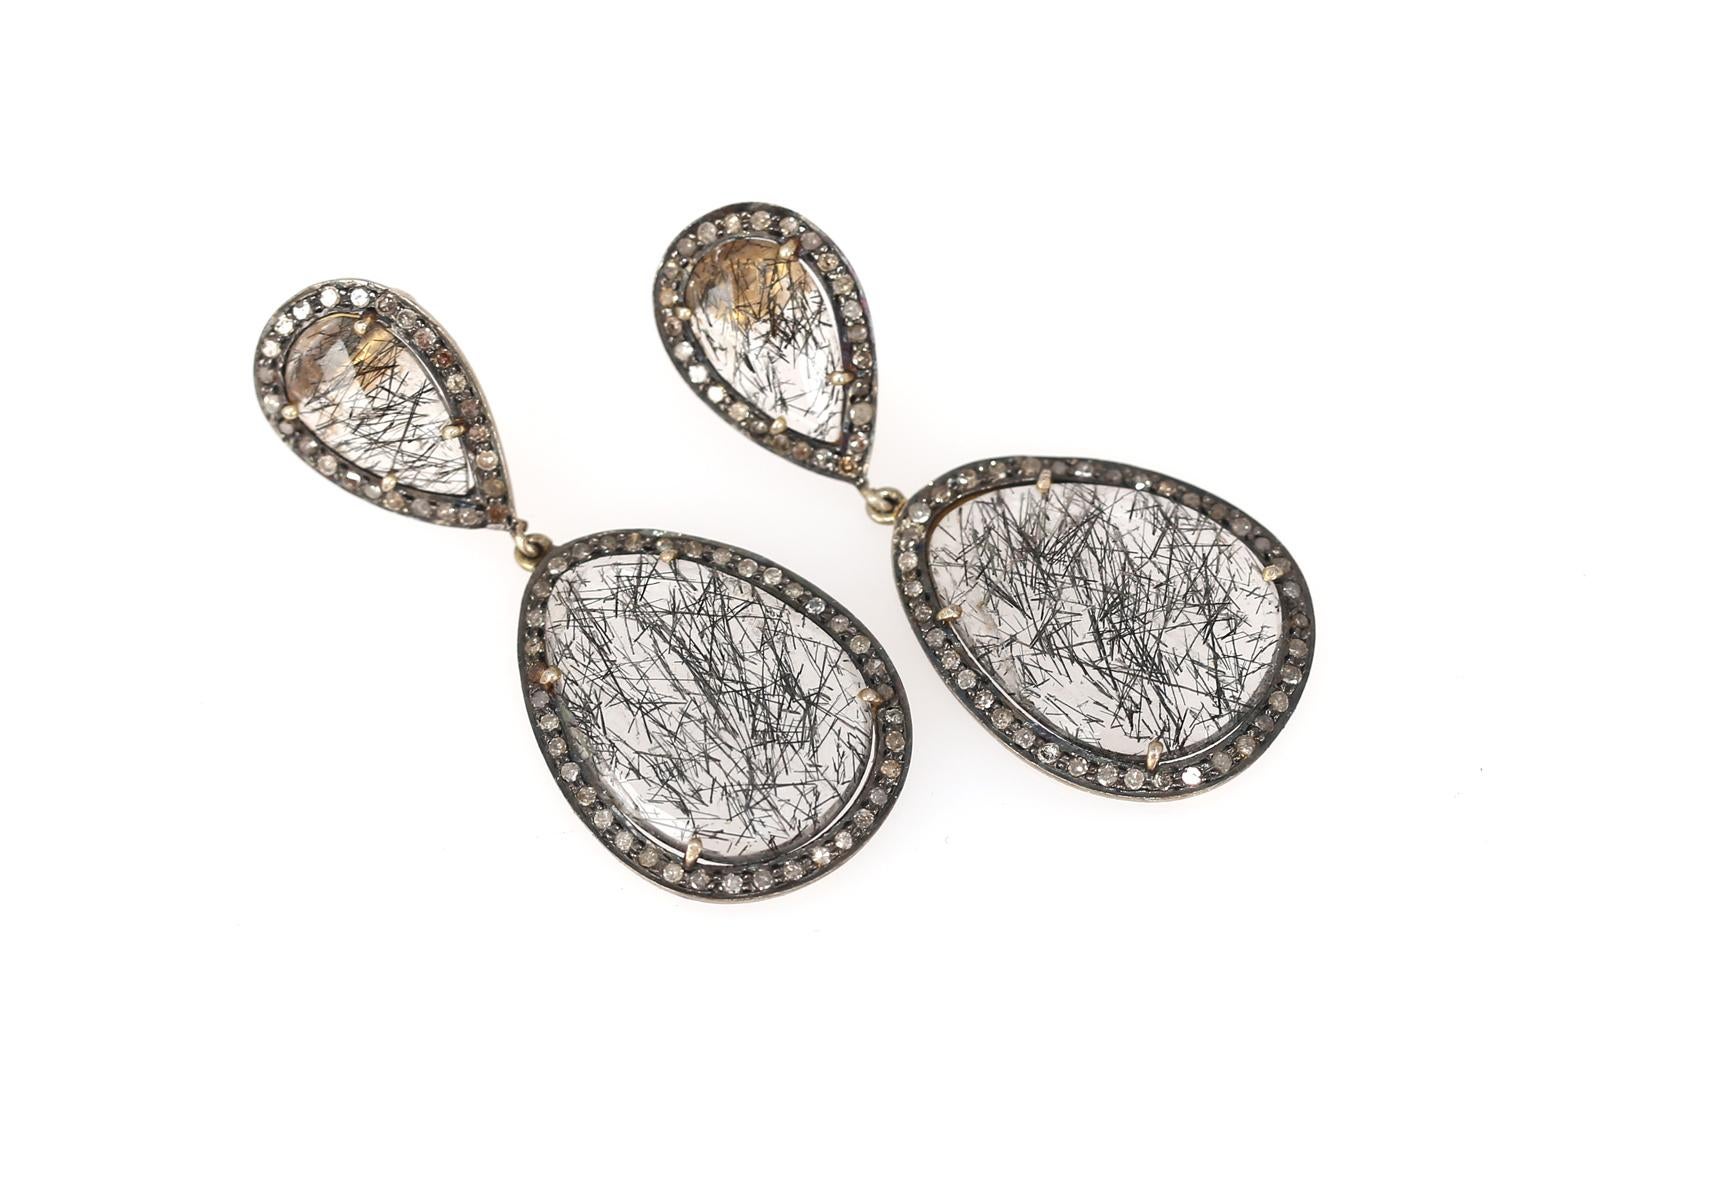 Hairy stone Earrings in Gold Silver and with Rose-cut Diamonds.

Very unusual, almost transparent stone with natural inclusions creating a superb 3D effect. Rose-cut Diamonds are mounted in a pear shaped form around the stone. The earrings sit